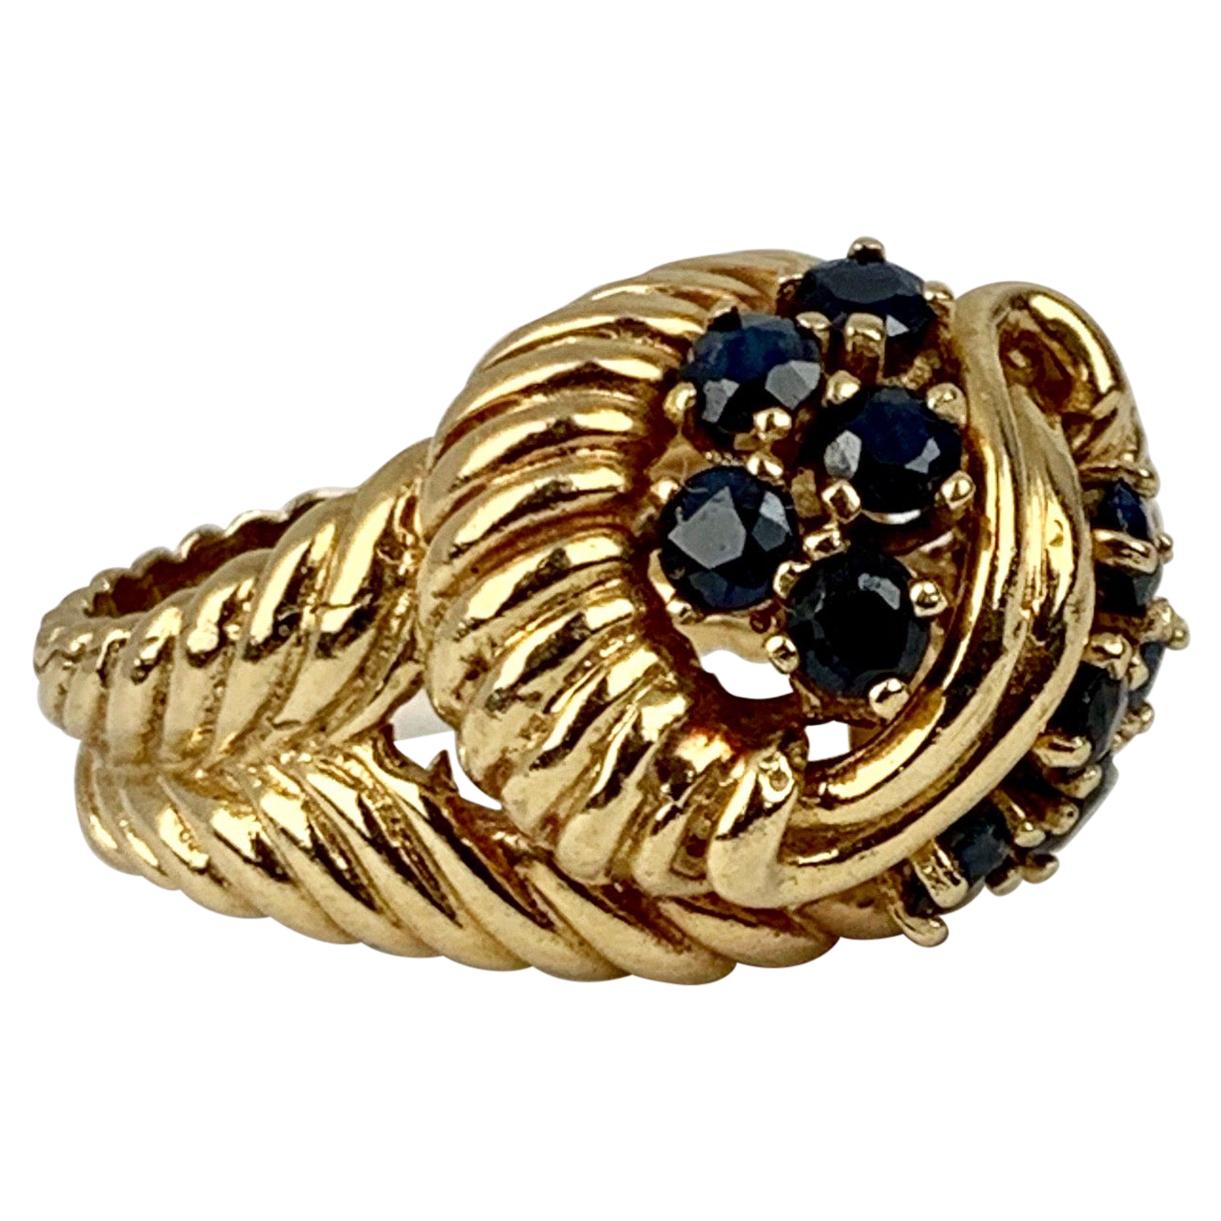  Shrimp Style Gold Ring with 10 Round Faceted Sapphires, 14 kt y.g.